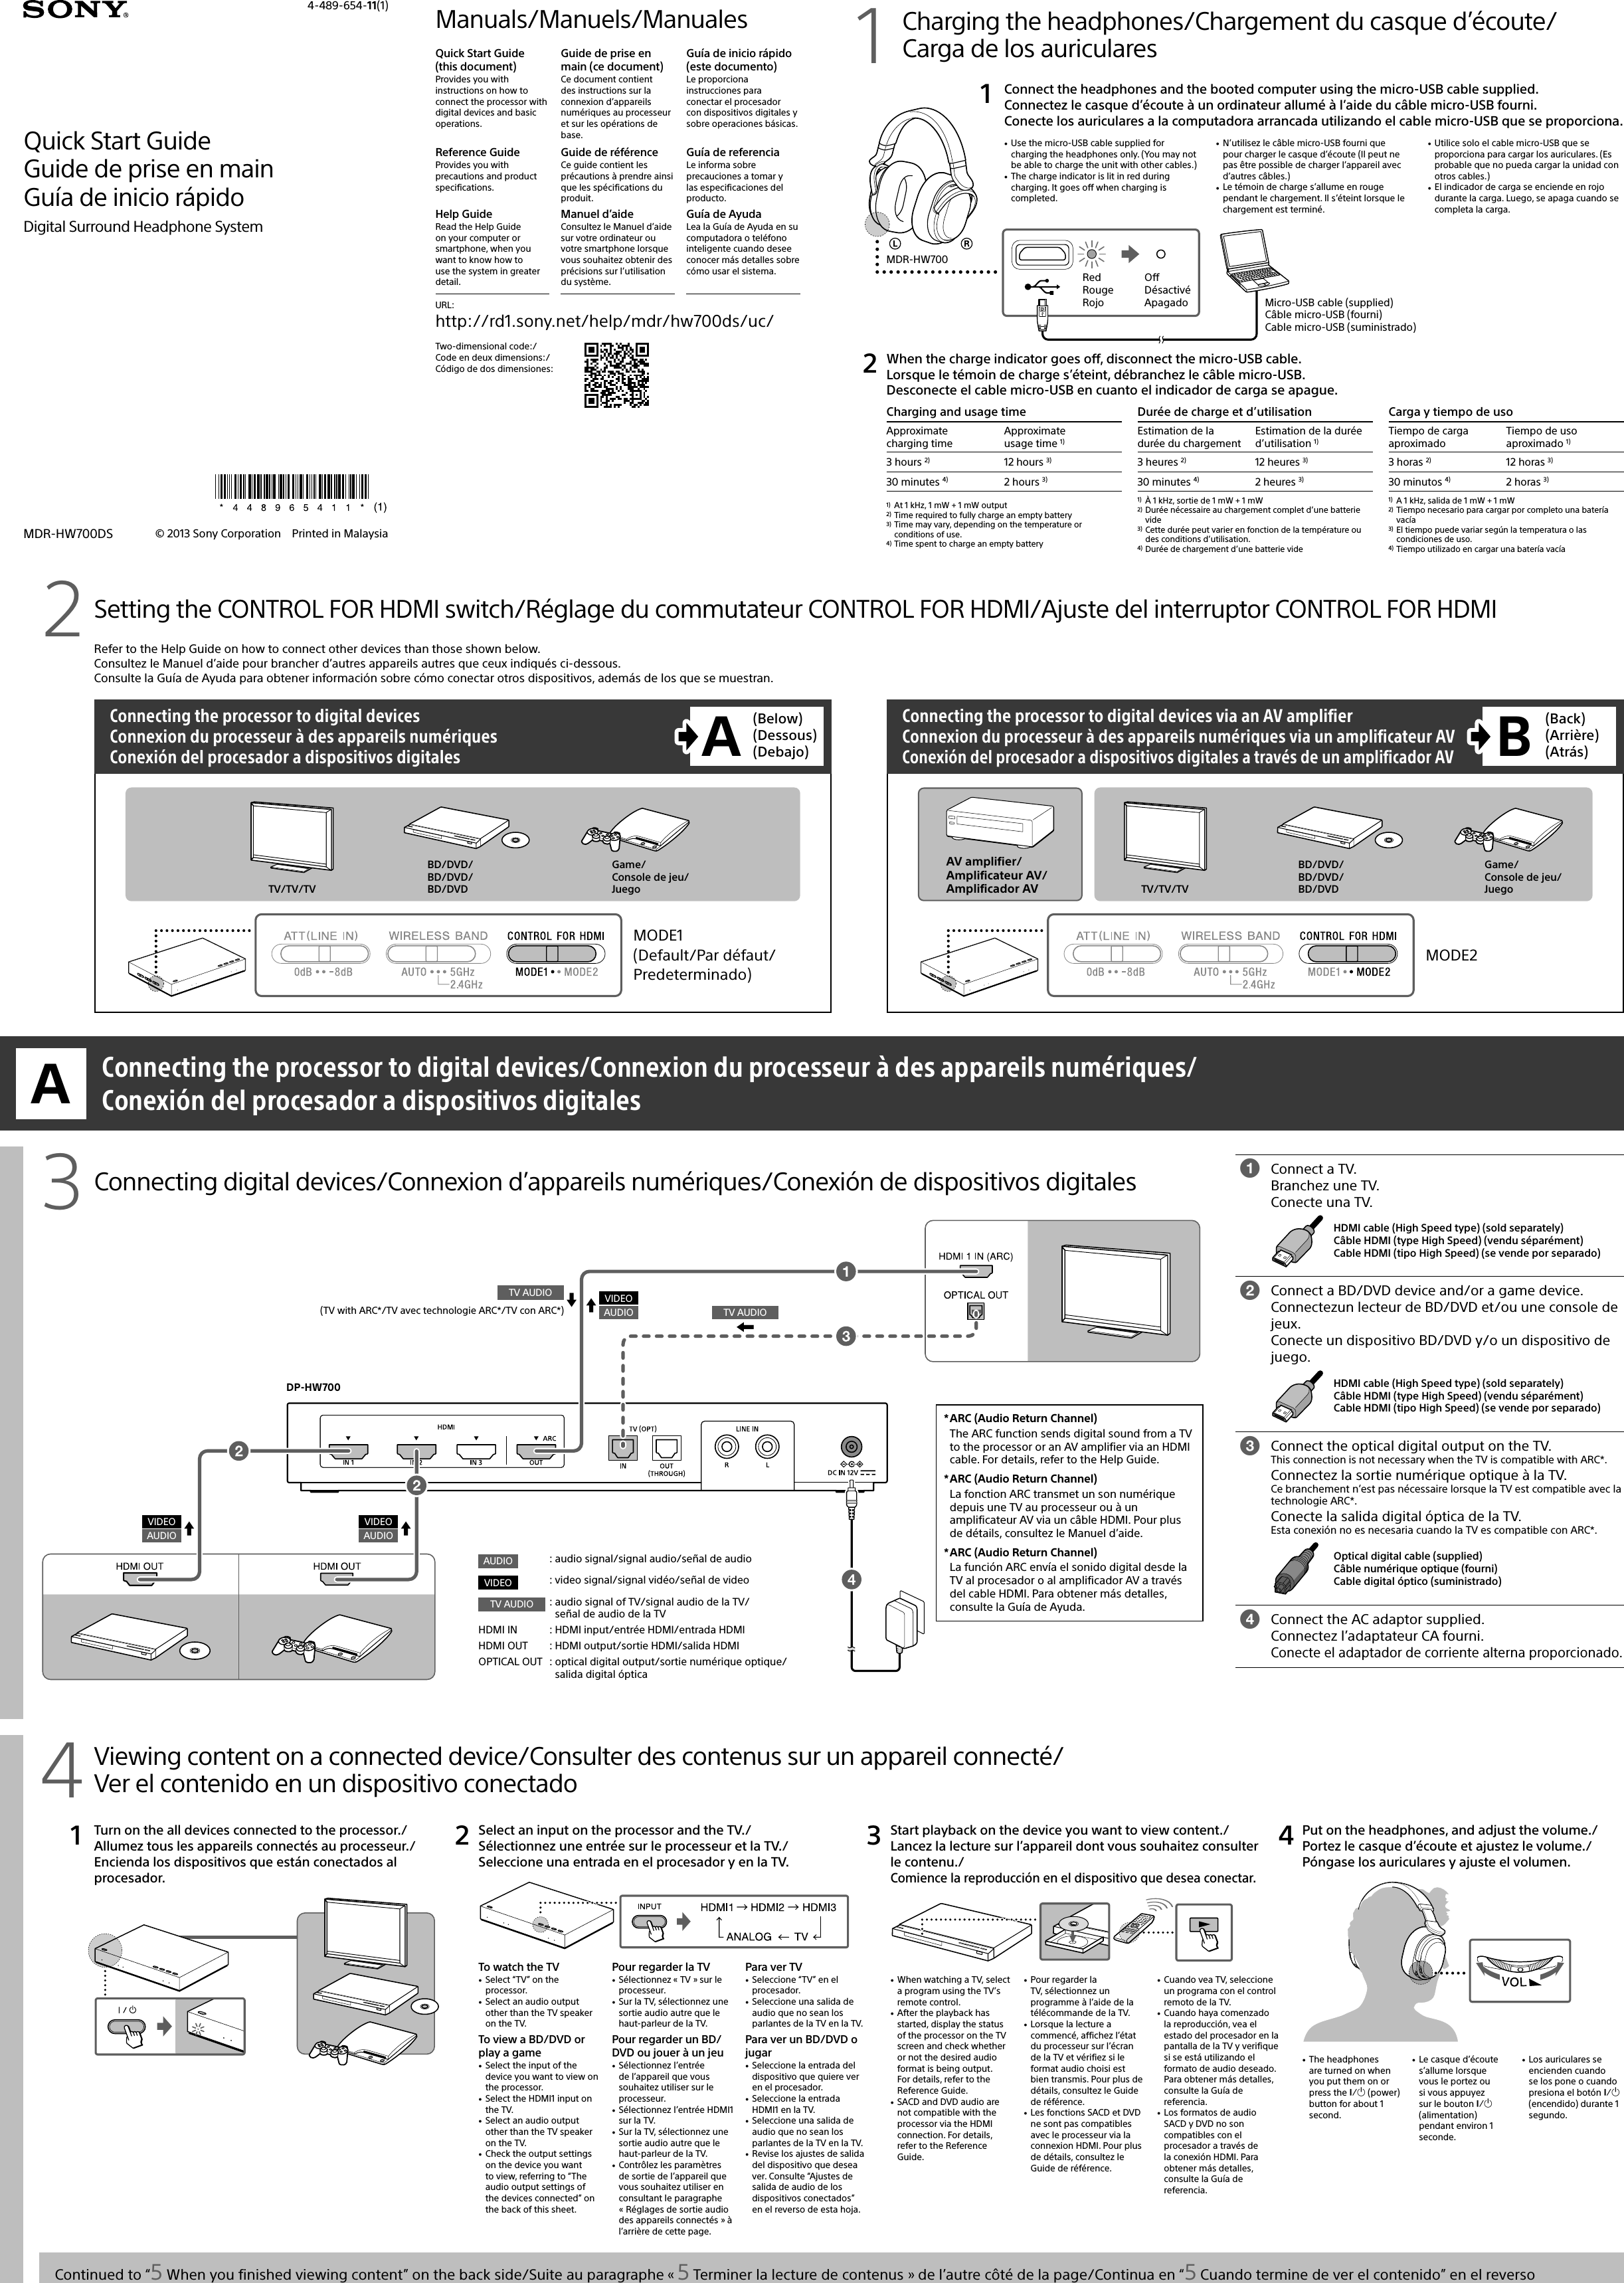 Page 1 of 2 - Sony MDR-HW700DS User Manual Quick Start Guide MDRHW700DS Qsg